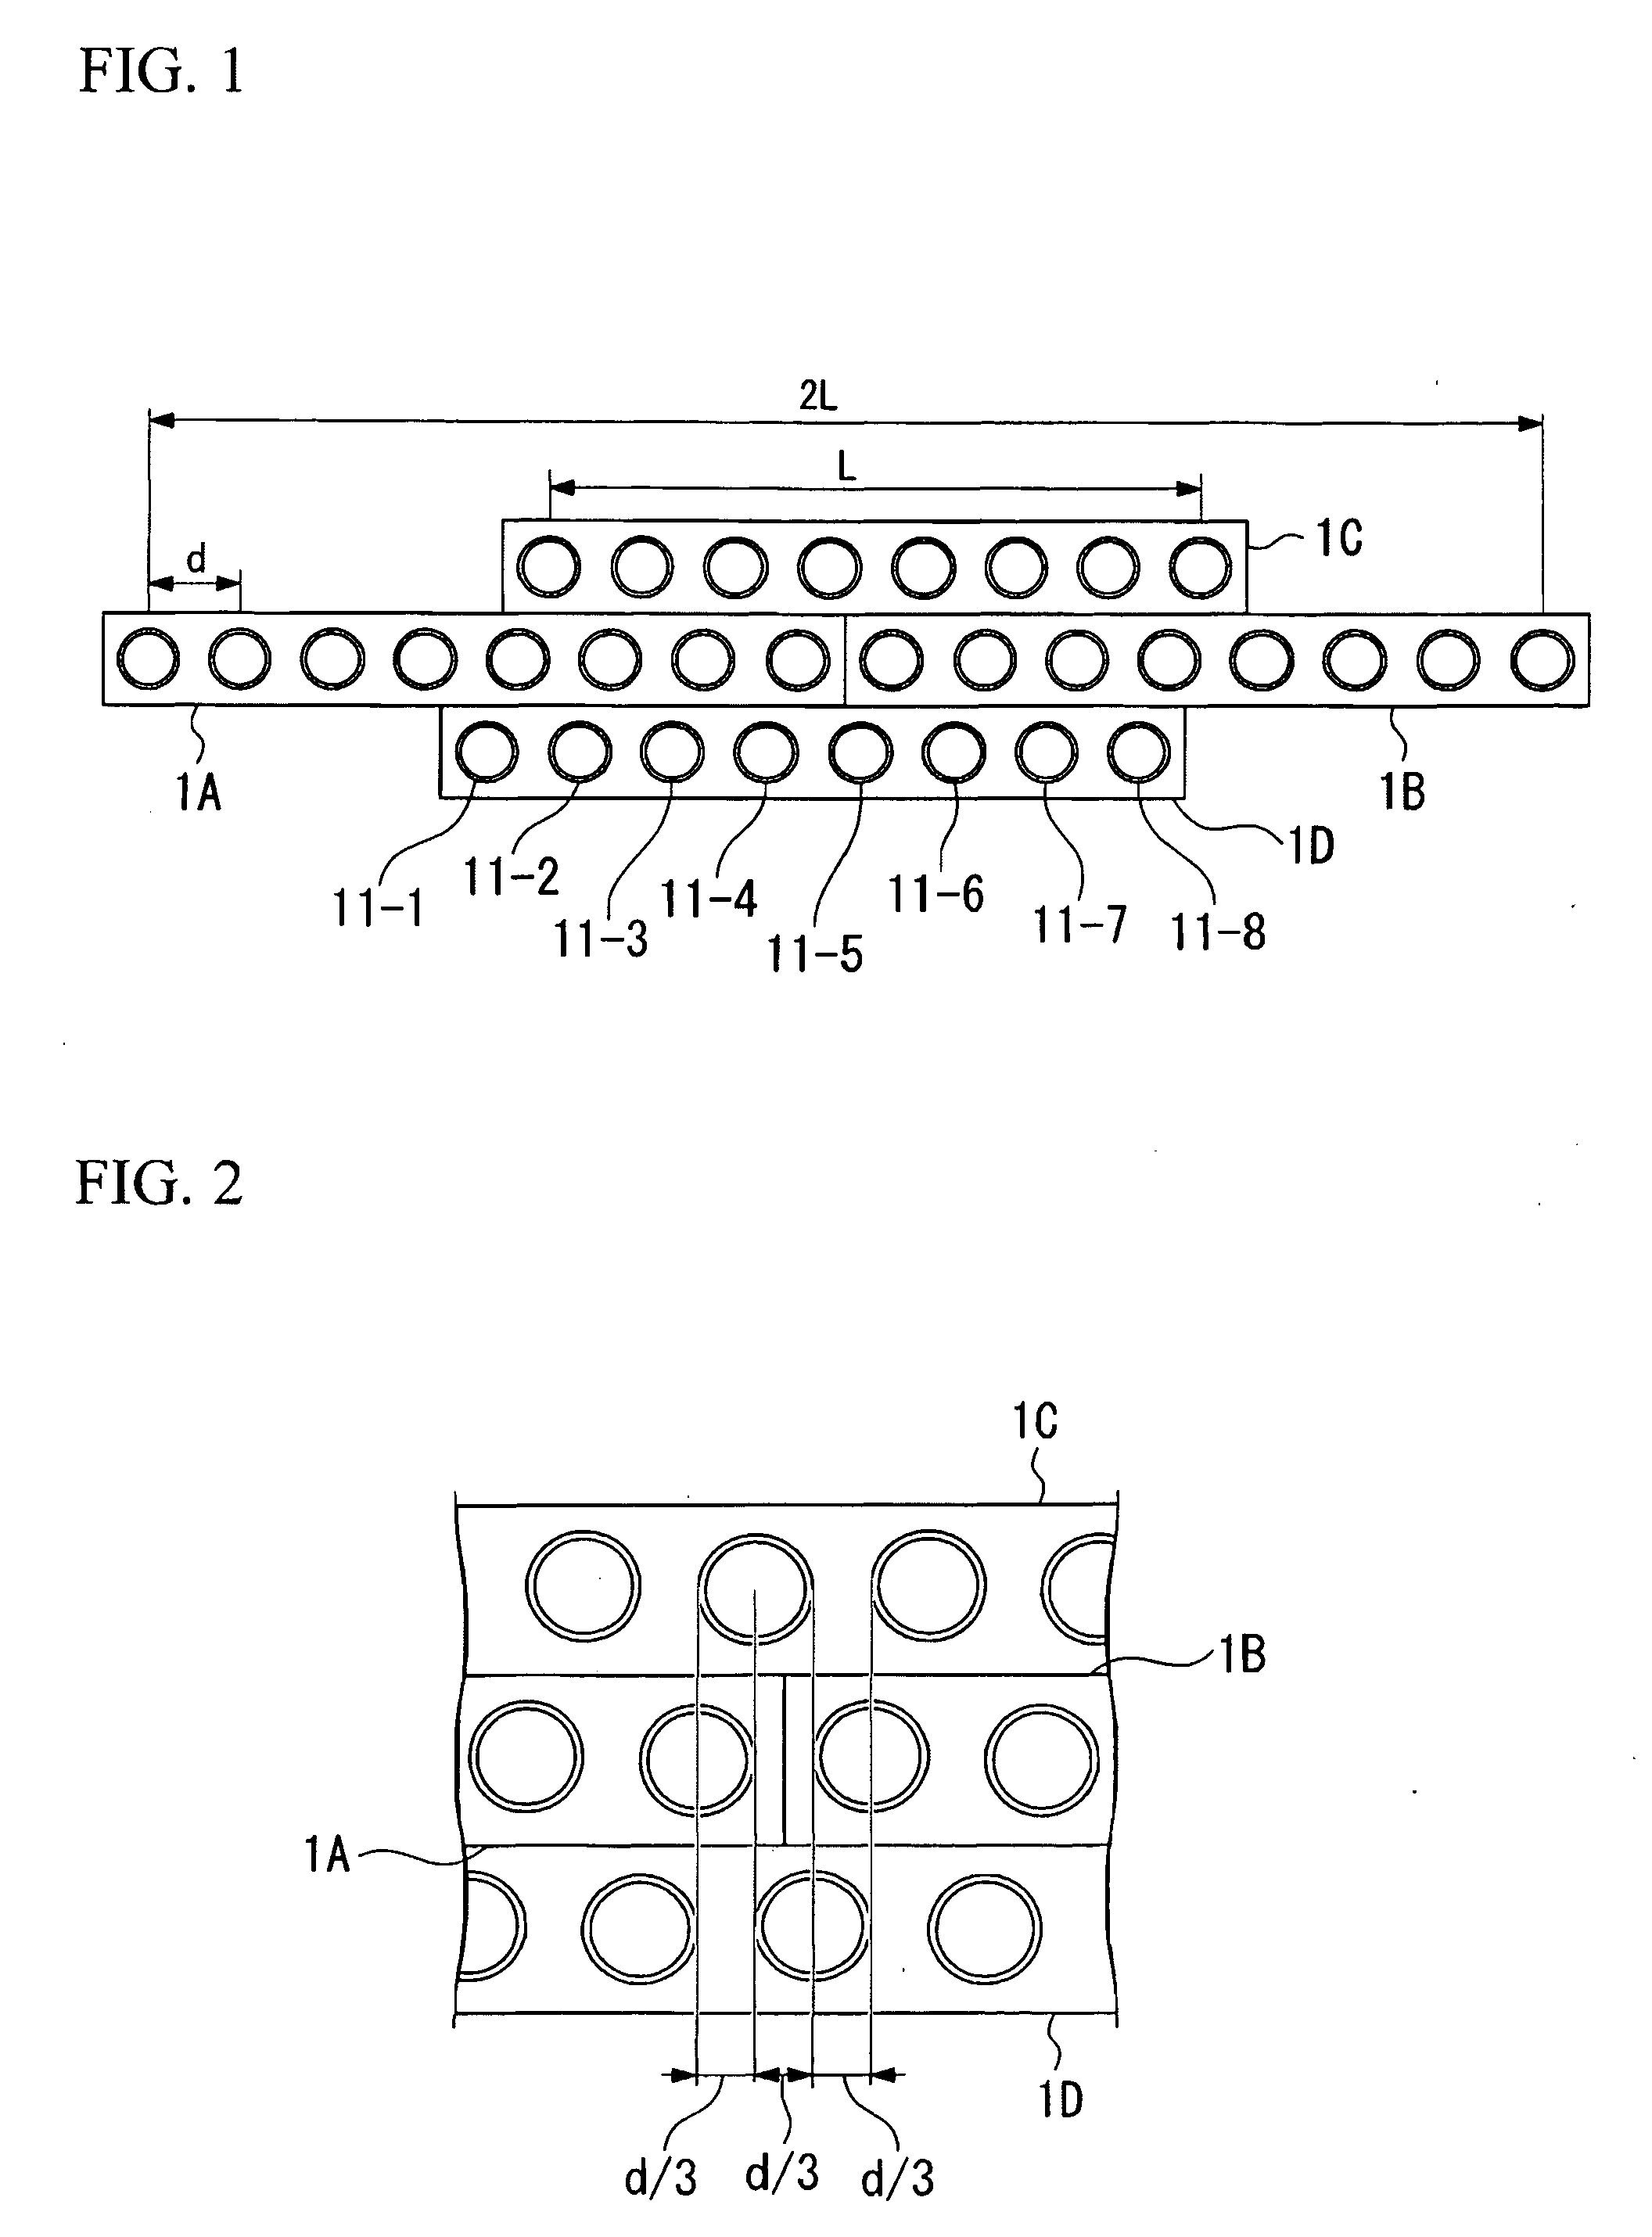 Array speaker system and array microphone system